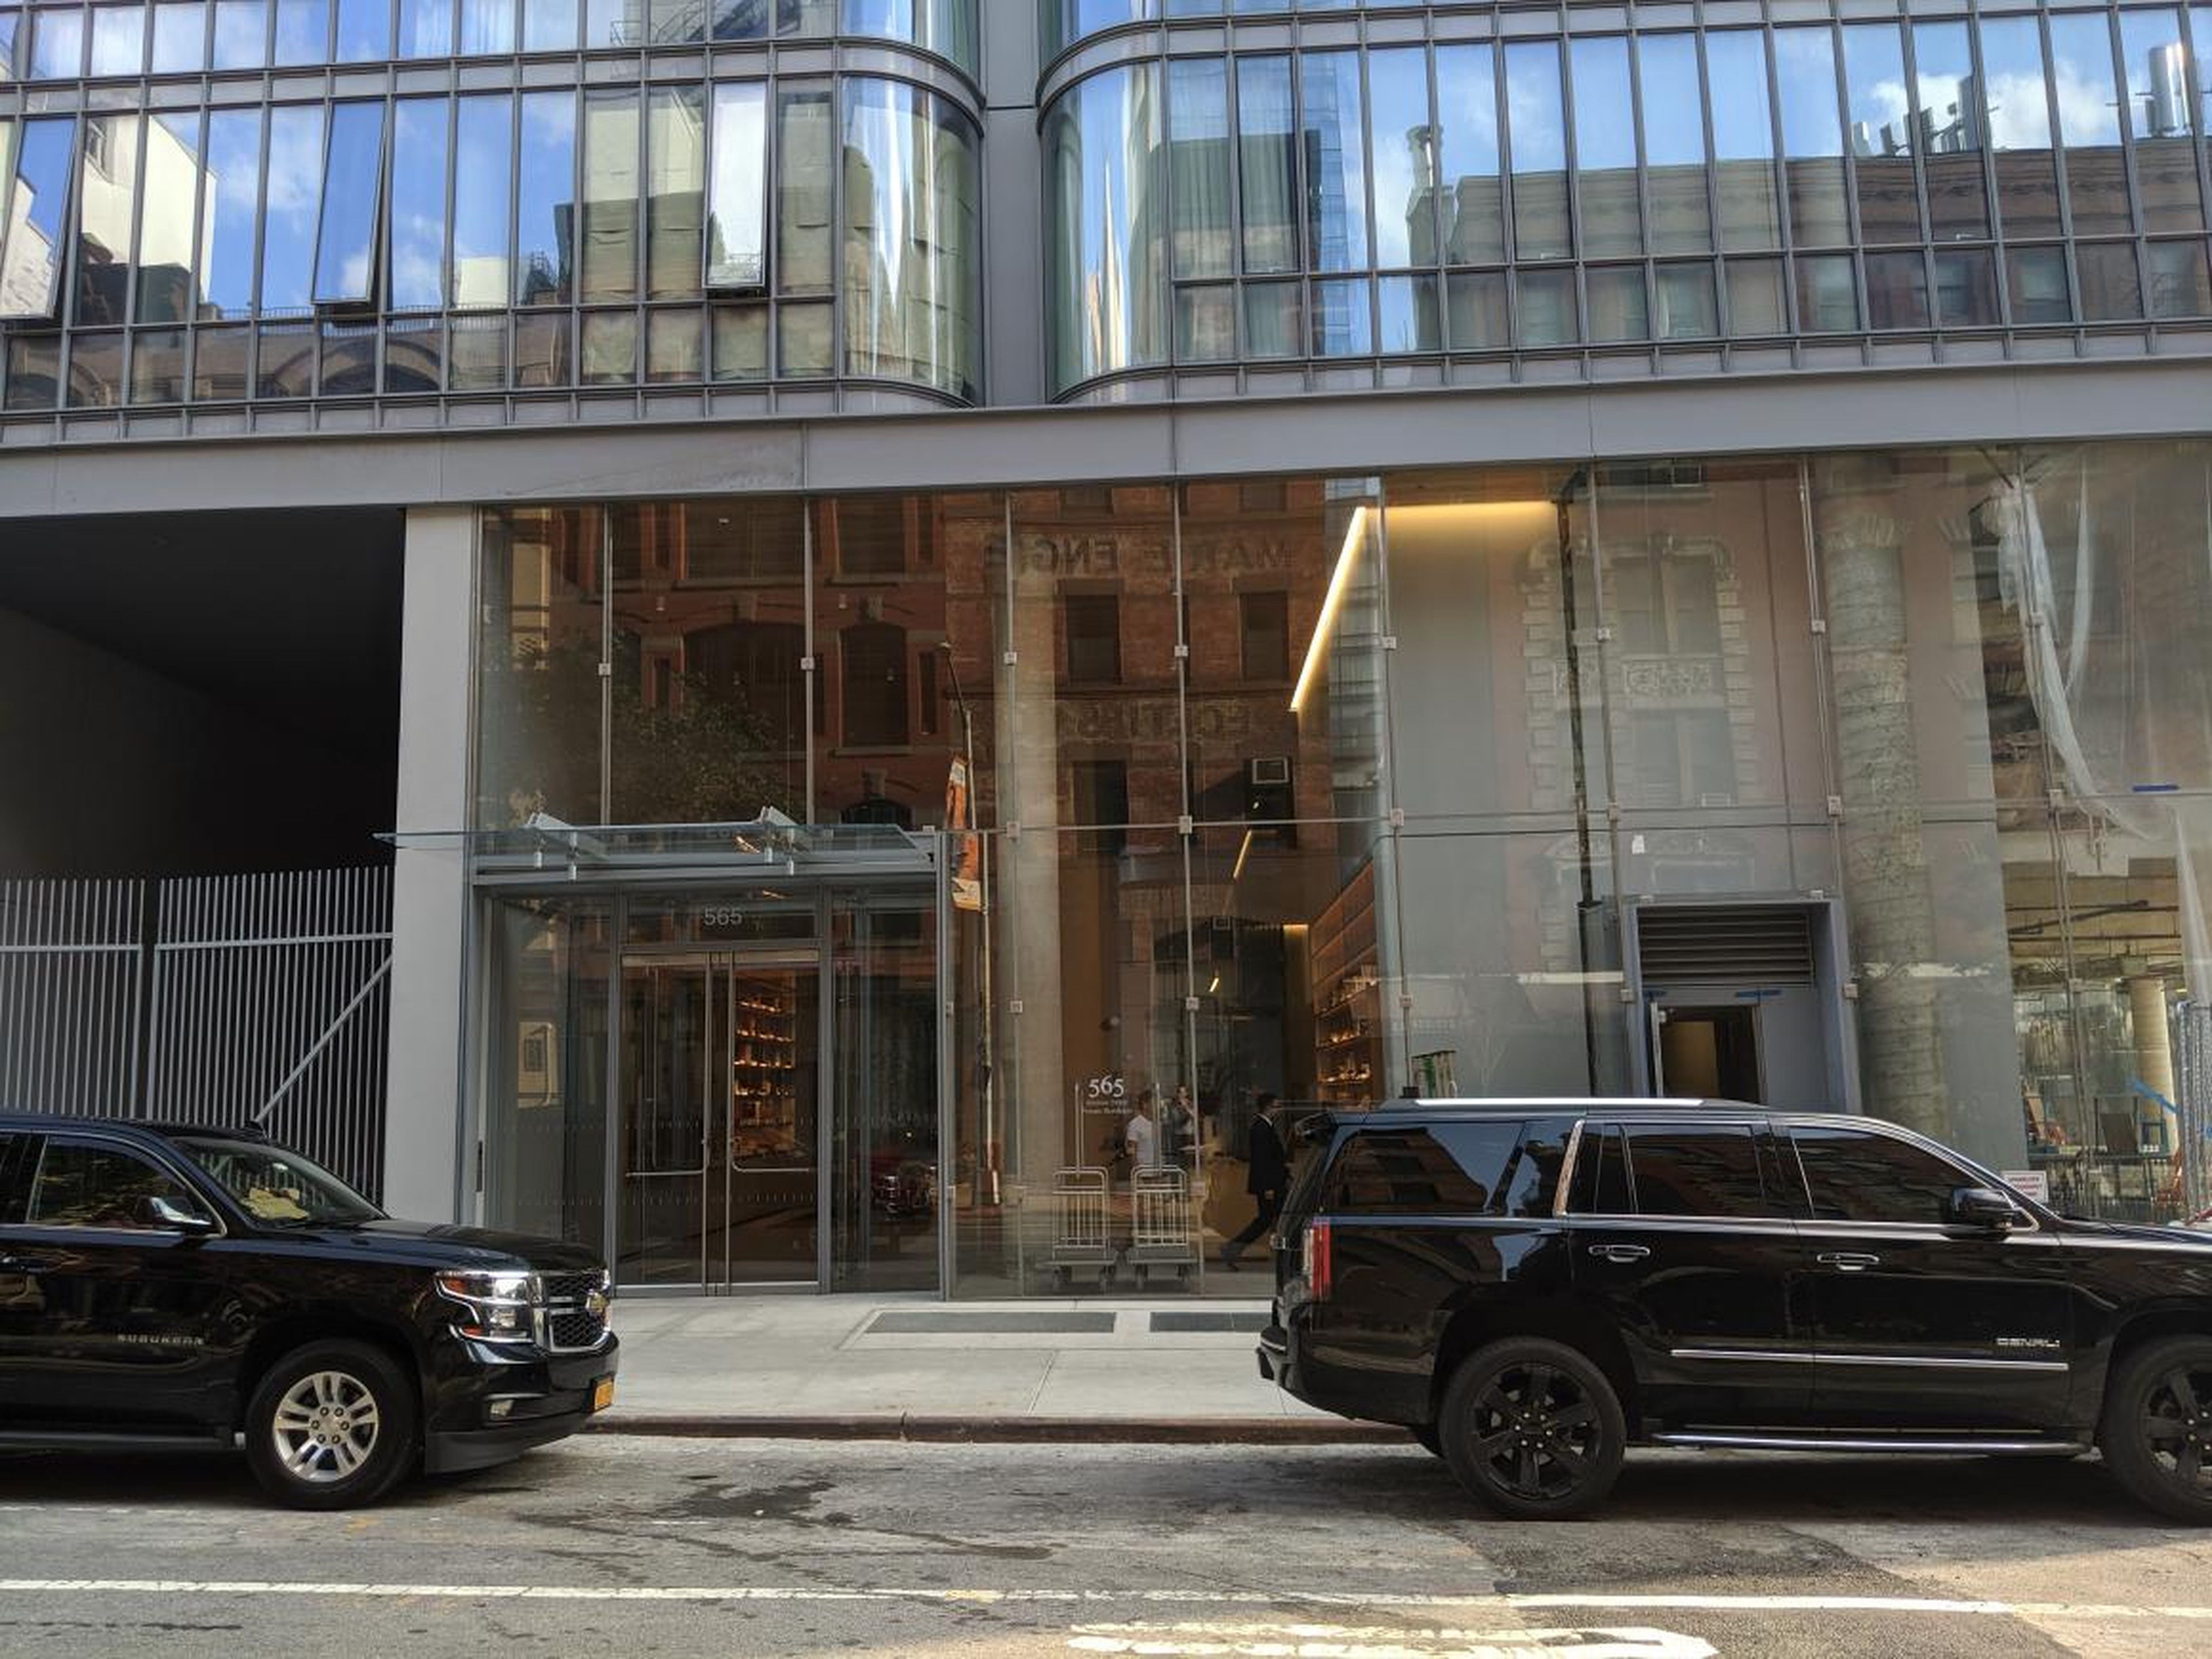 On the Broome Street side, however, where residents will enter and exit their condos, the building is open for business. A few people streamed in and out during the few minutes Business Insider gawked from across the street.